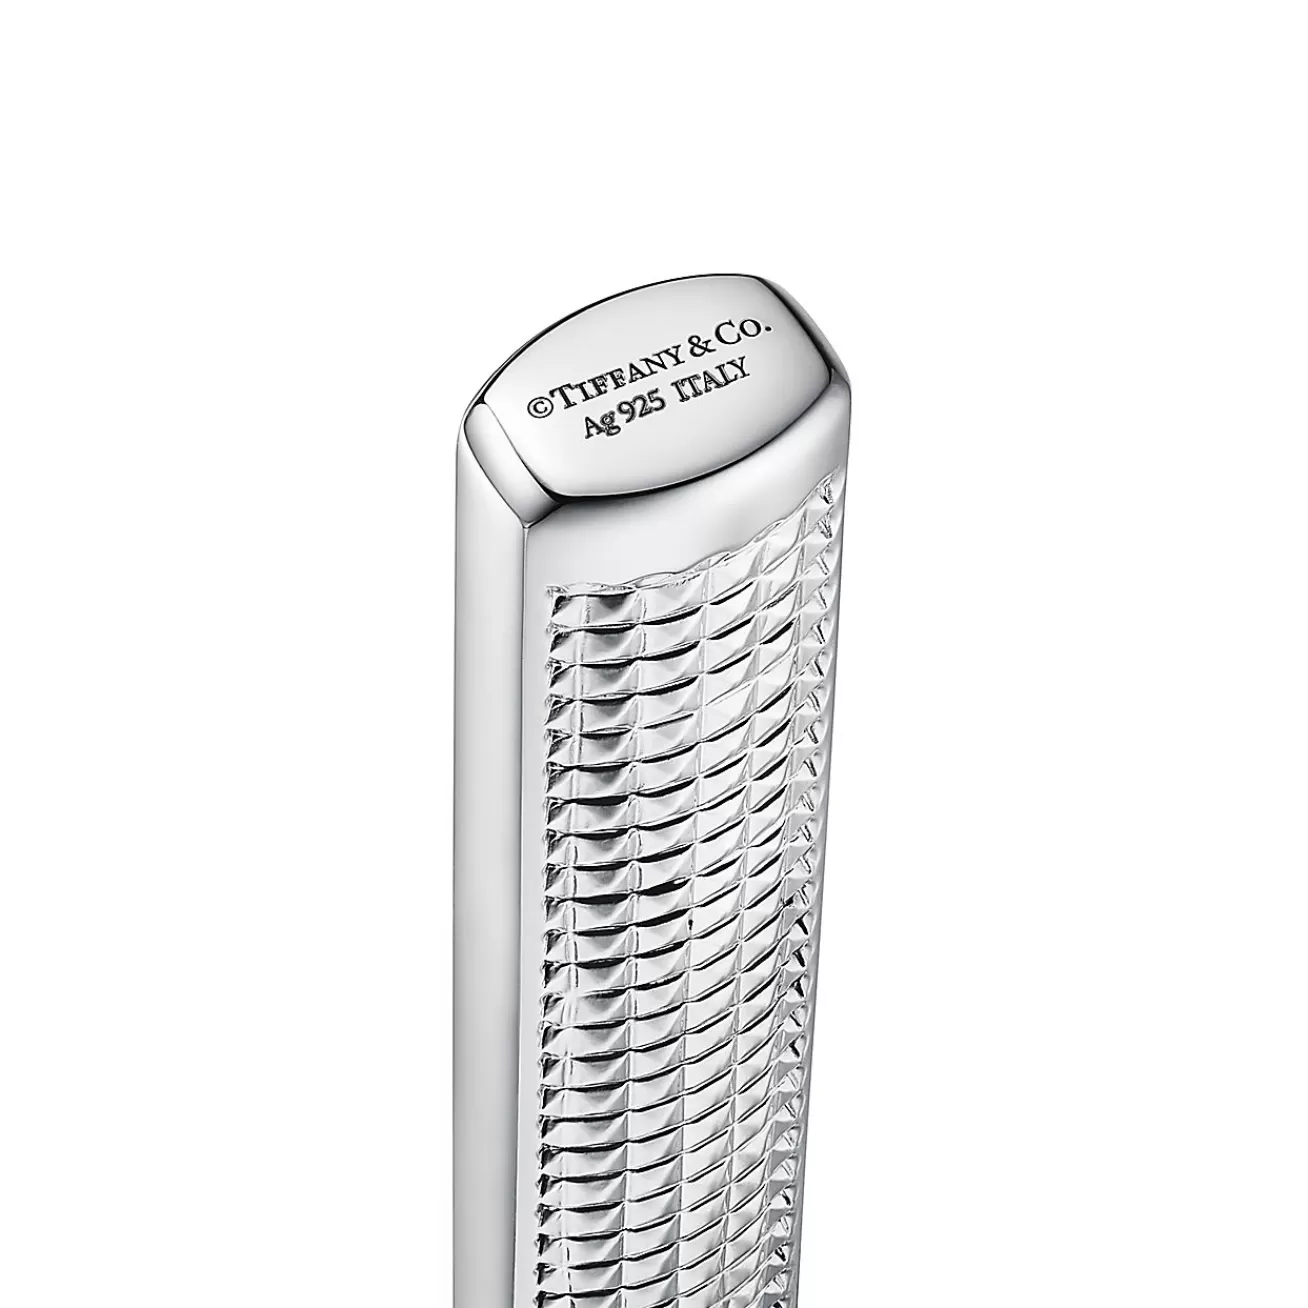 Tiffany & Co. Diamond Point bottle opener in sterling silver and stainless steel. | ^ The Couple | Wedding Gifts